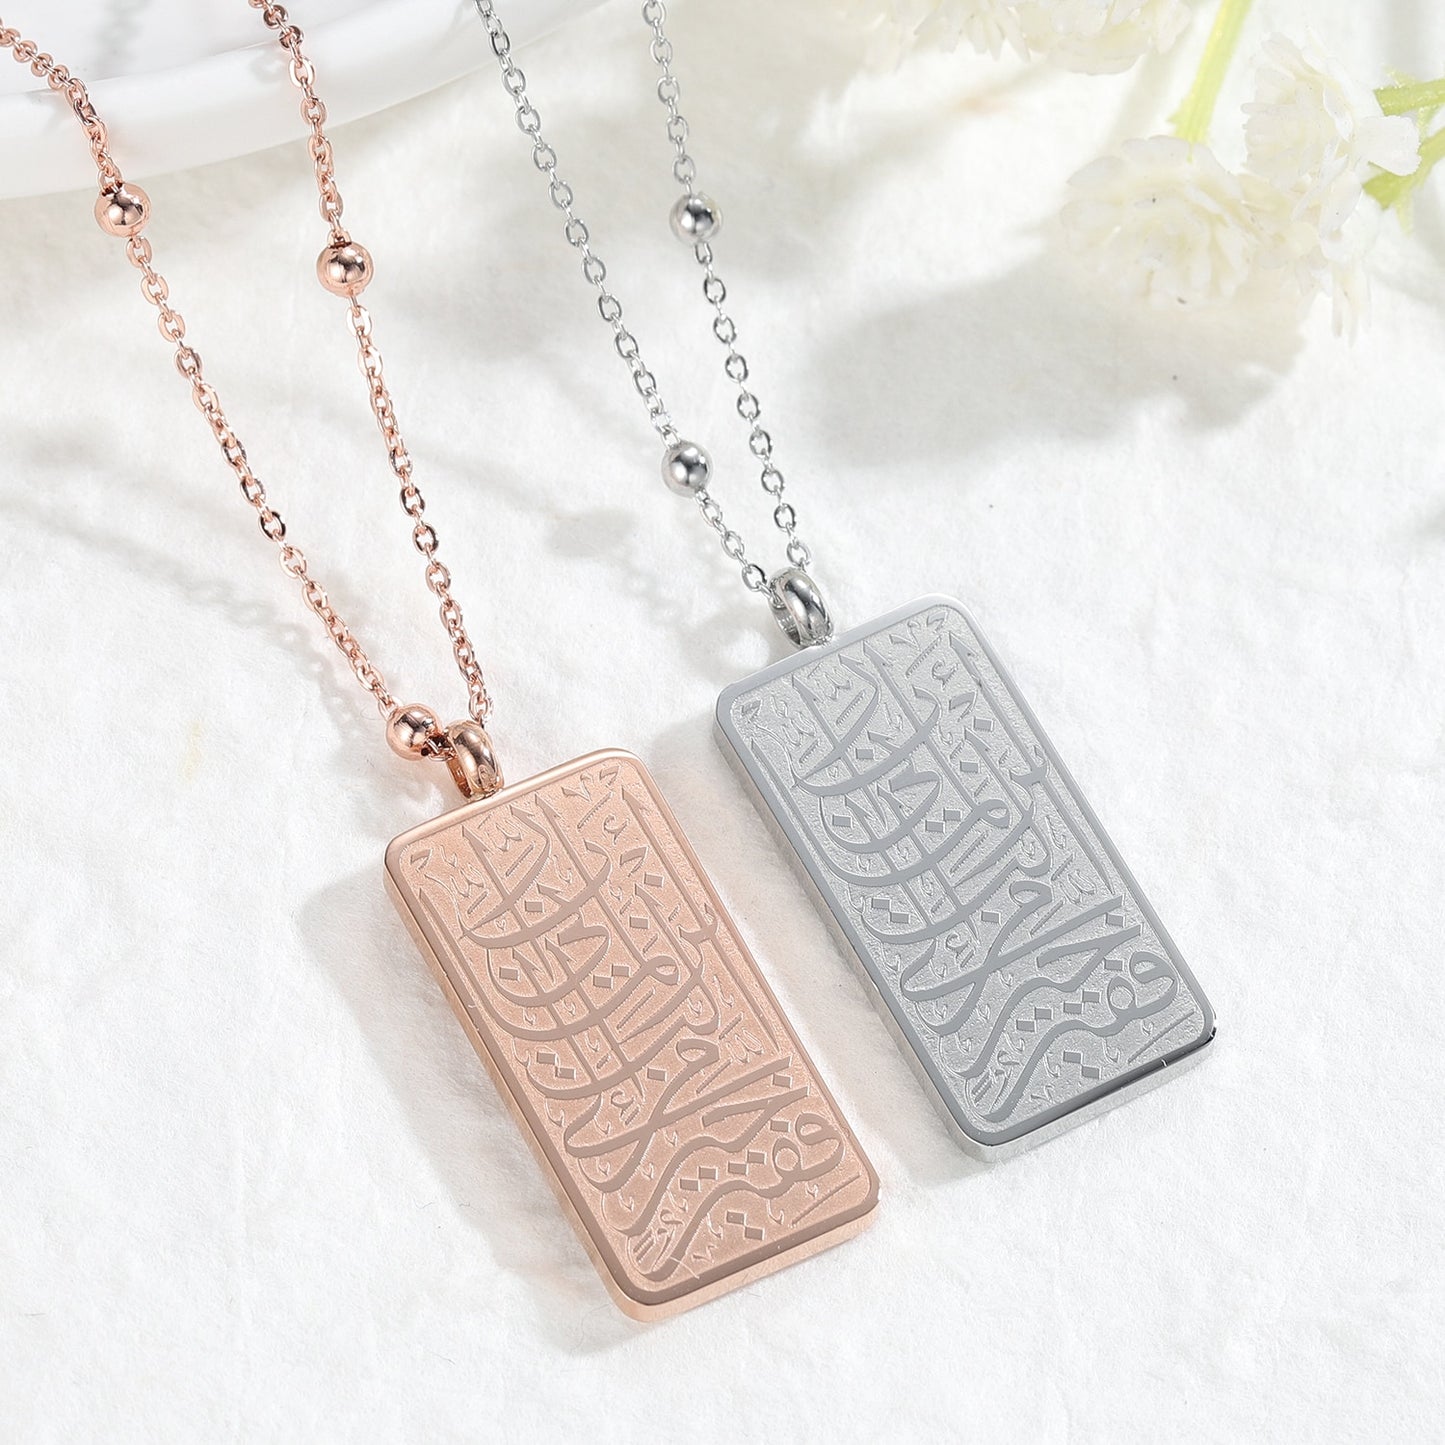 "Bestow your goodness upon me" - Calligraphy Necklace